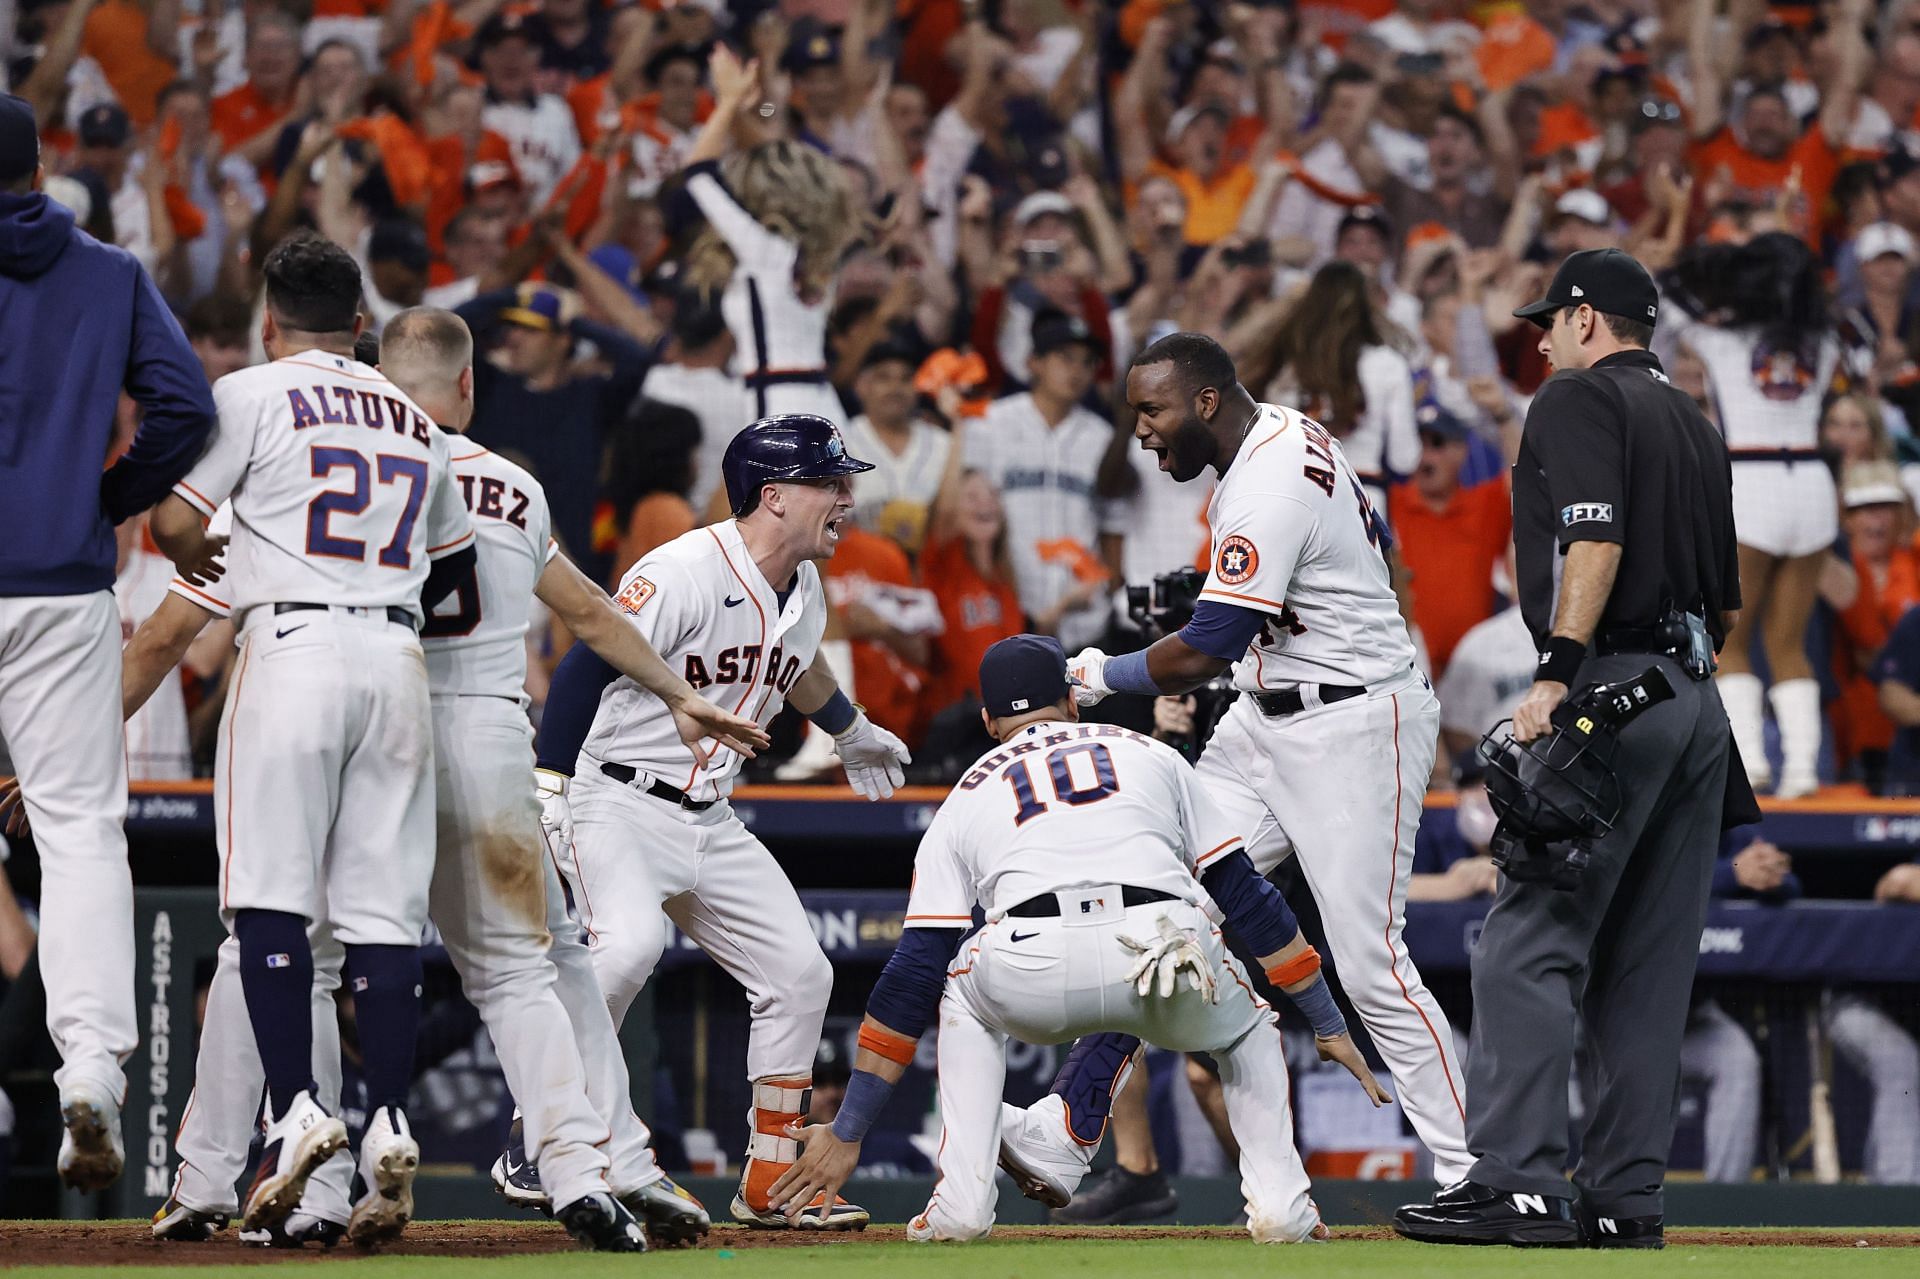 The Astros won their first World Series title in 2017.